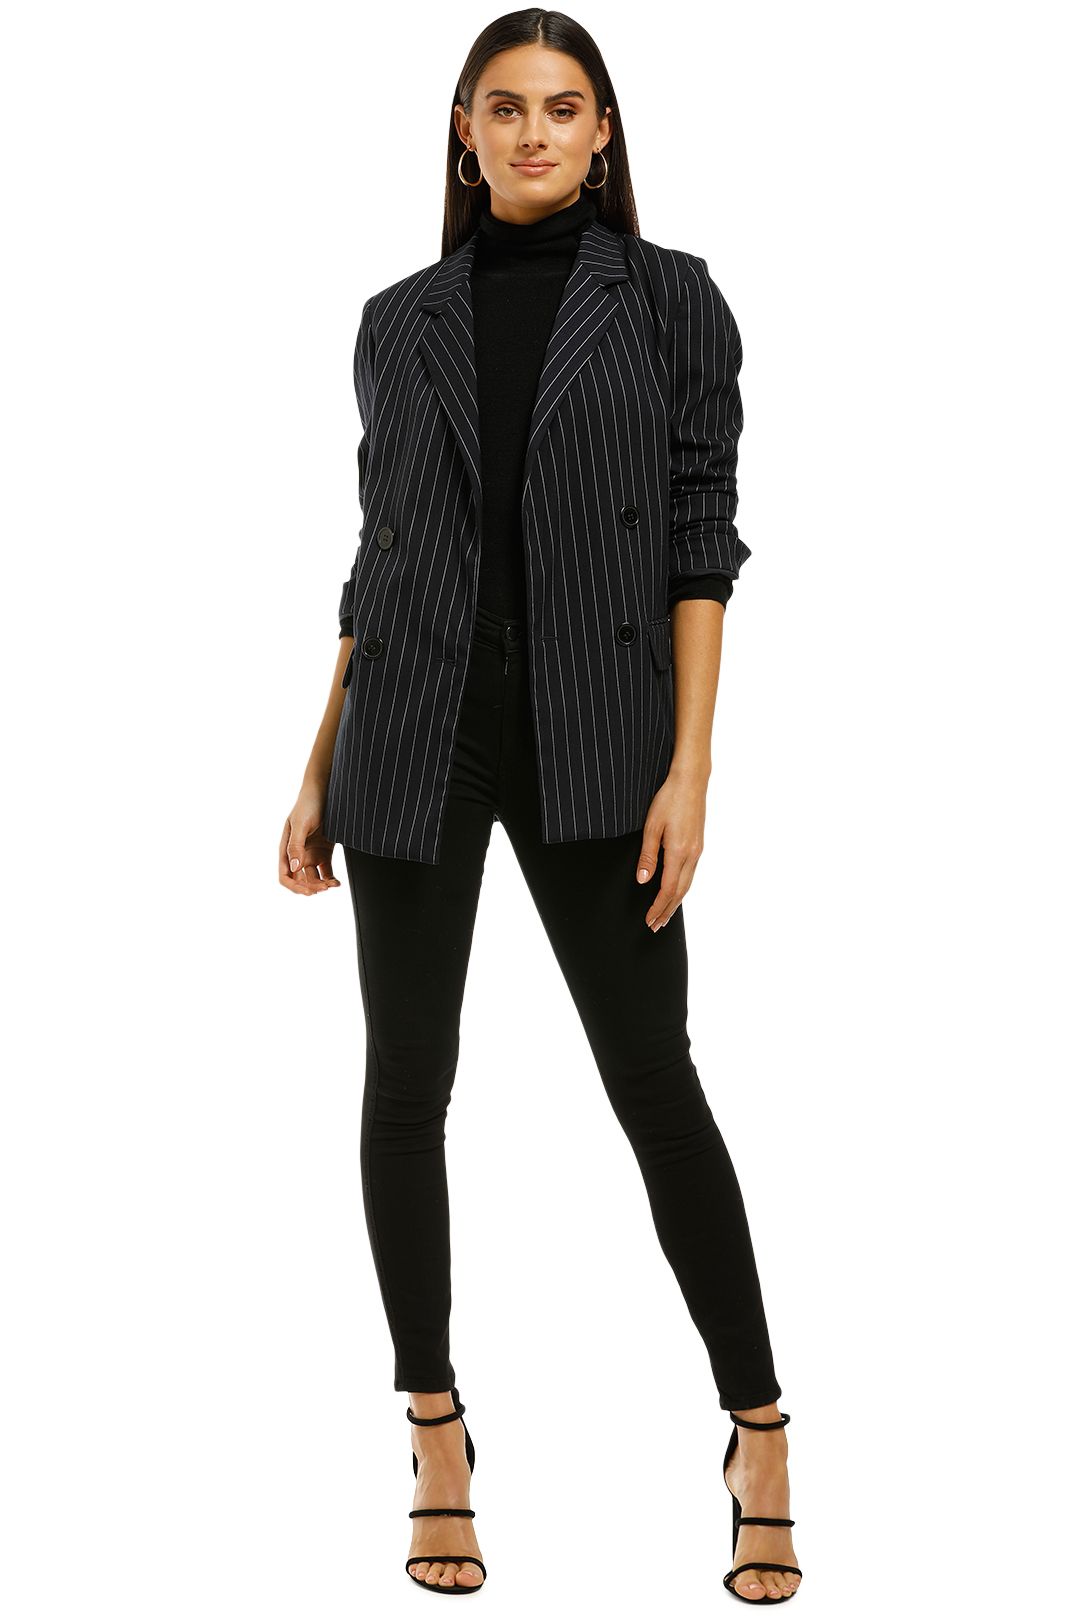 Nicholas the Label - Pinstripe Suiting Blazer - Navy - Front